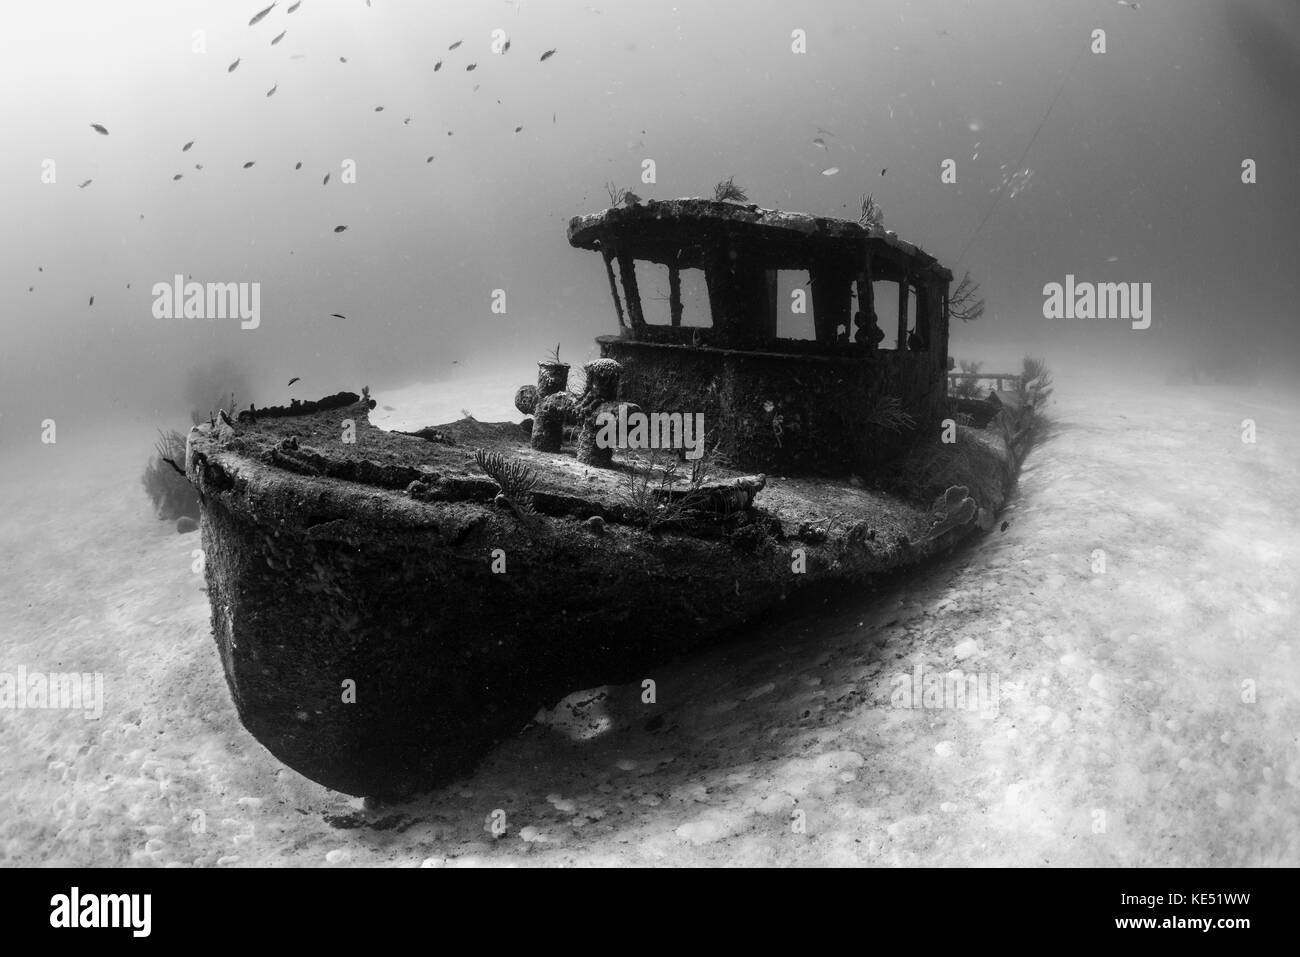 A tugboat wreck in the Bahamas. Stock Photo